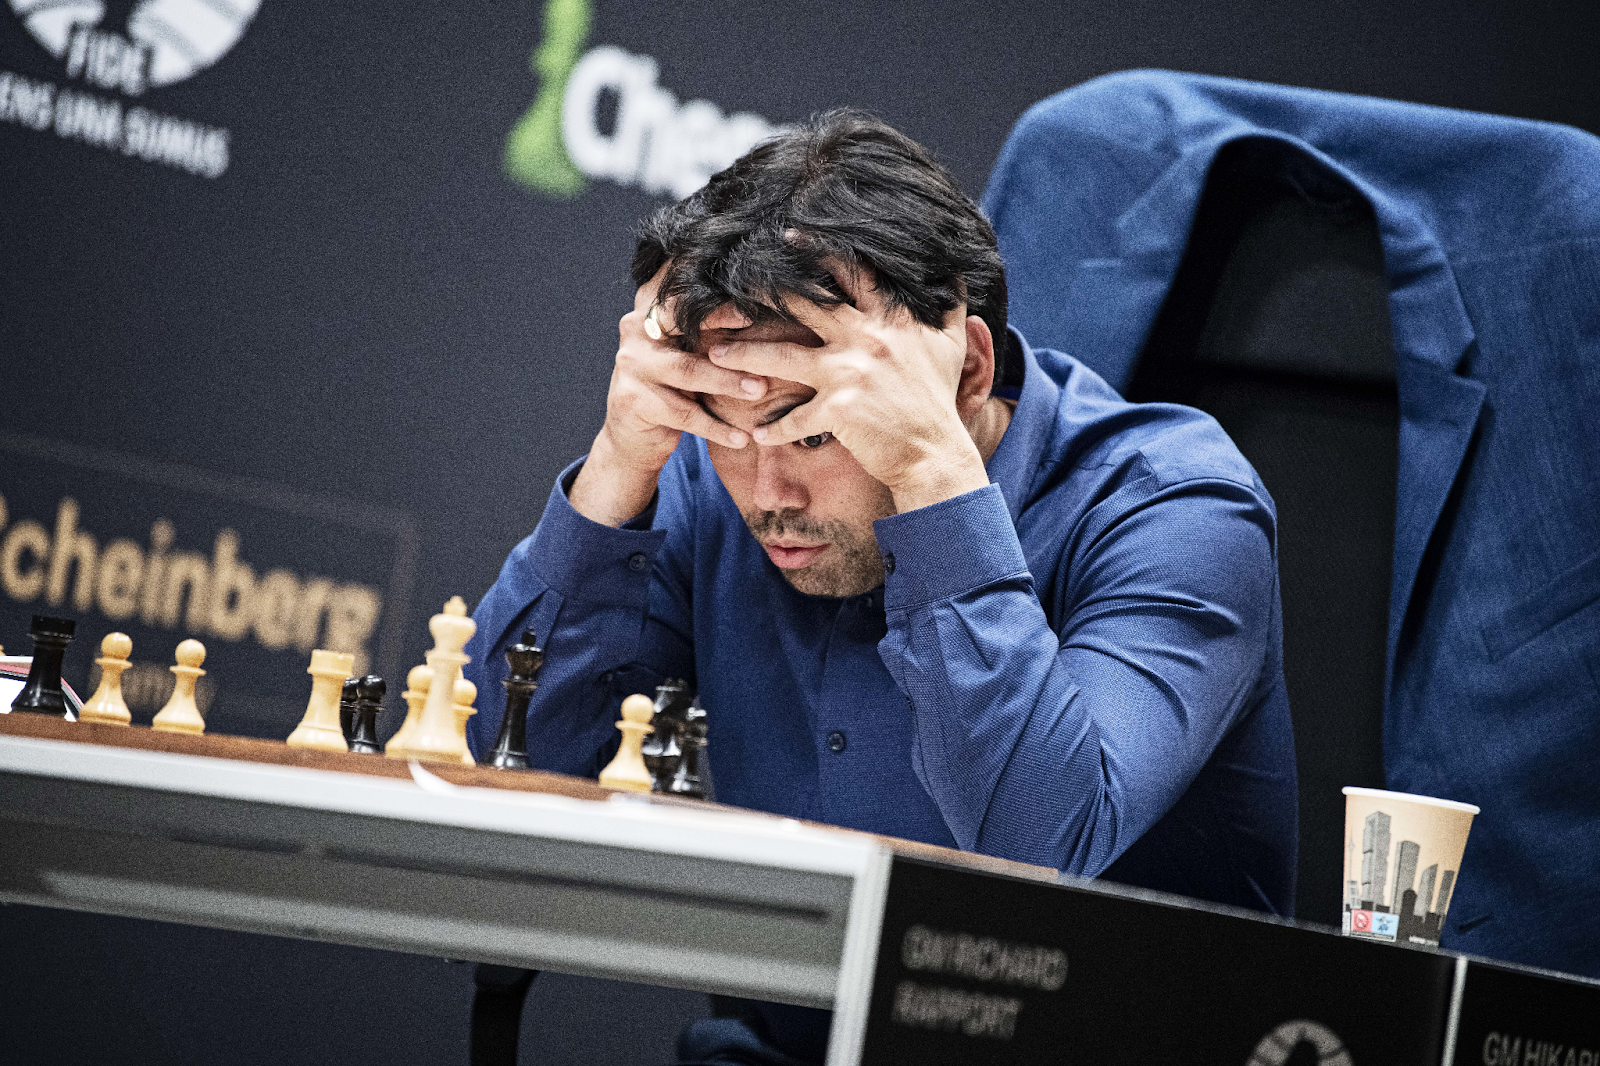 Standings Results FIDE Candidates Tournament 2022 (Round 8) with Nakamura,  Firouzja and Duda! 